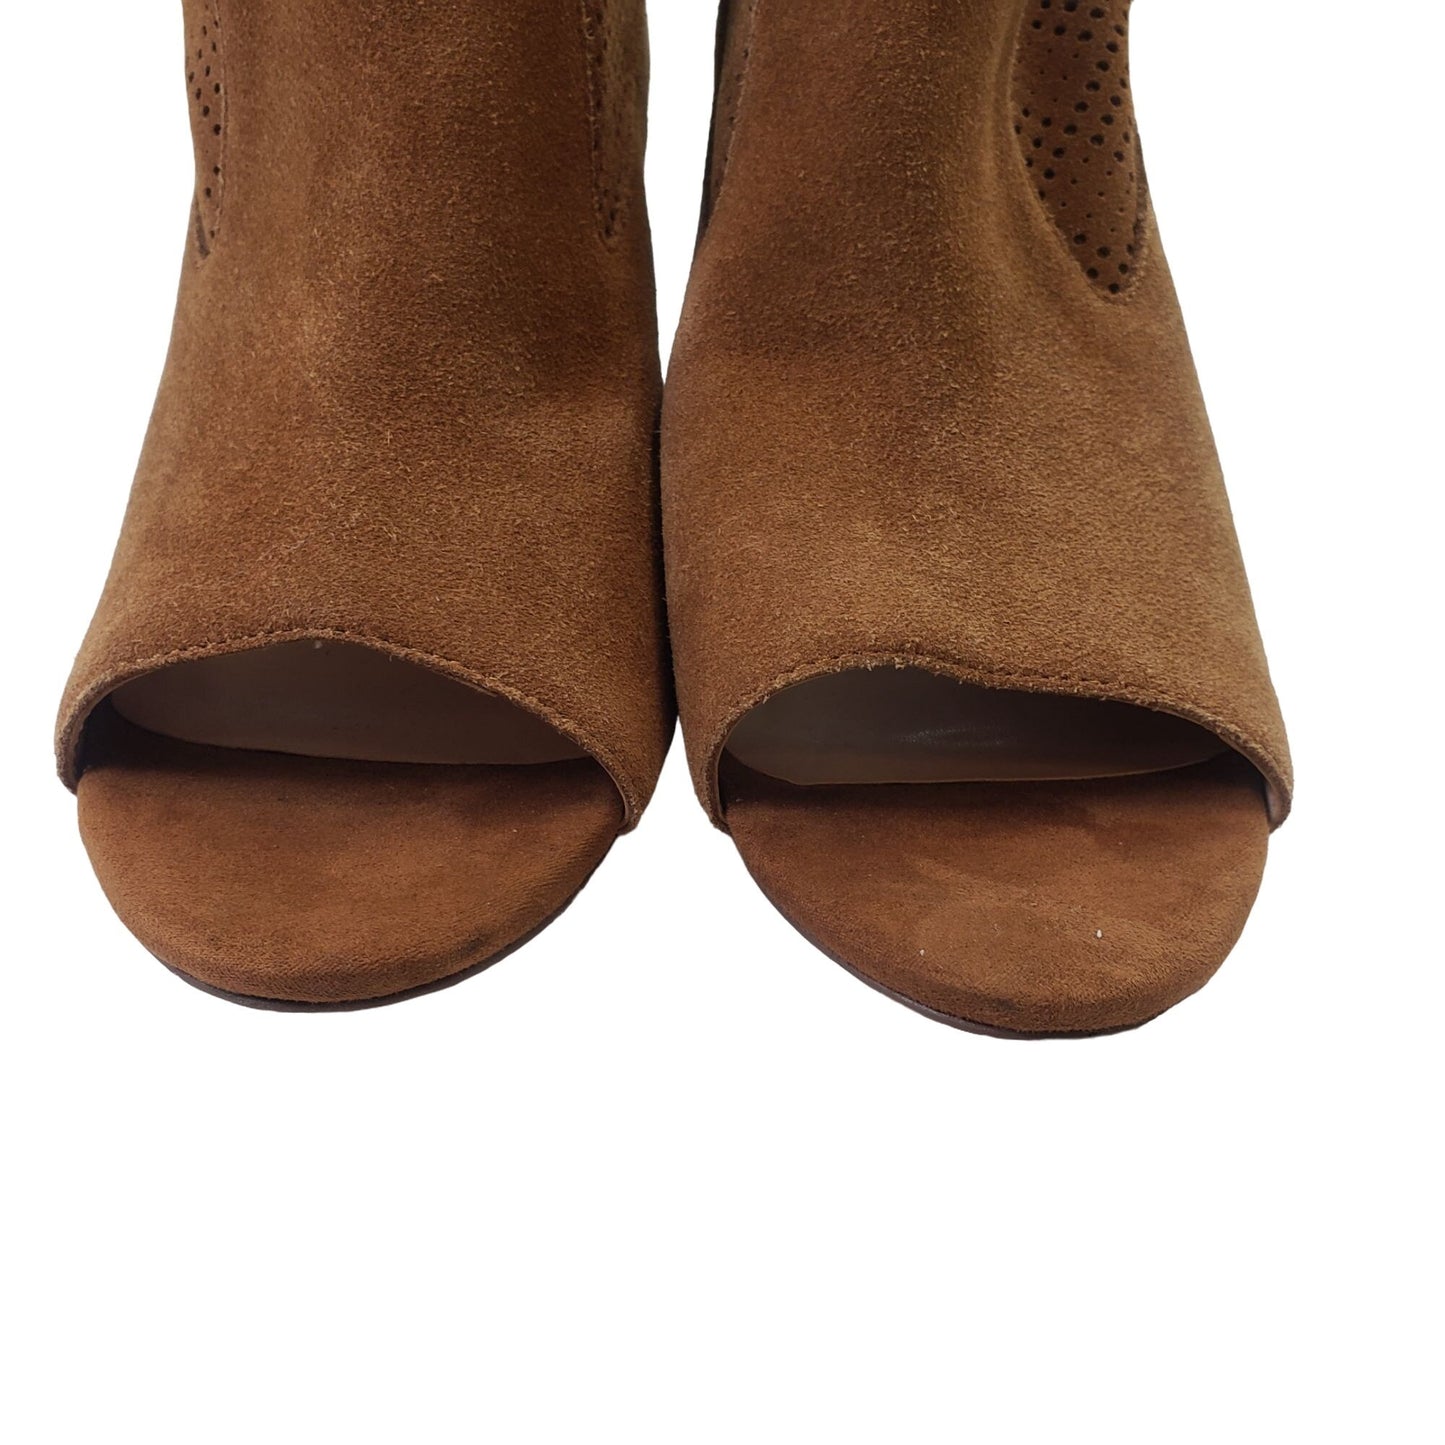 Steven by Steve Madden Ready Chestnut Suede Leather Ankle Booties Size 11